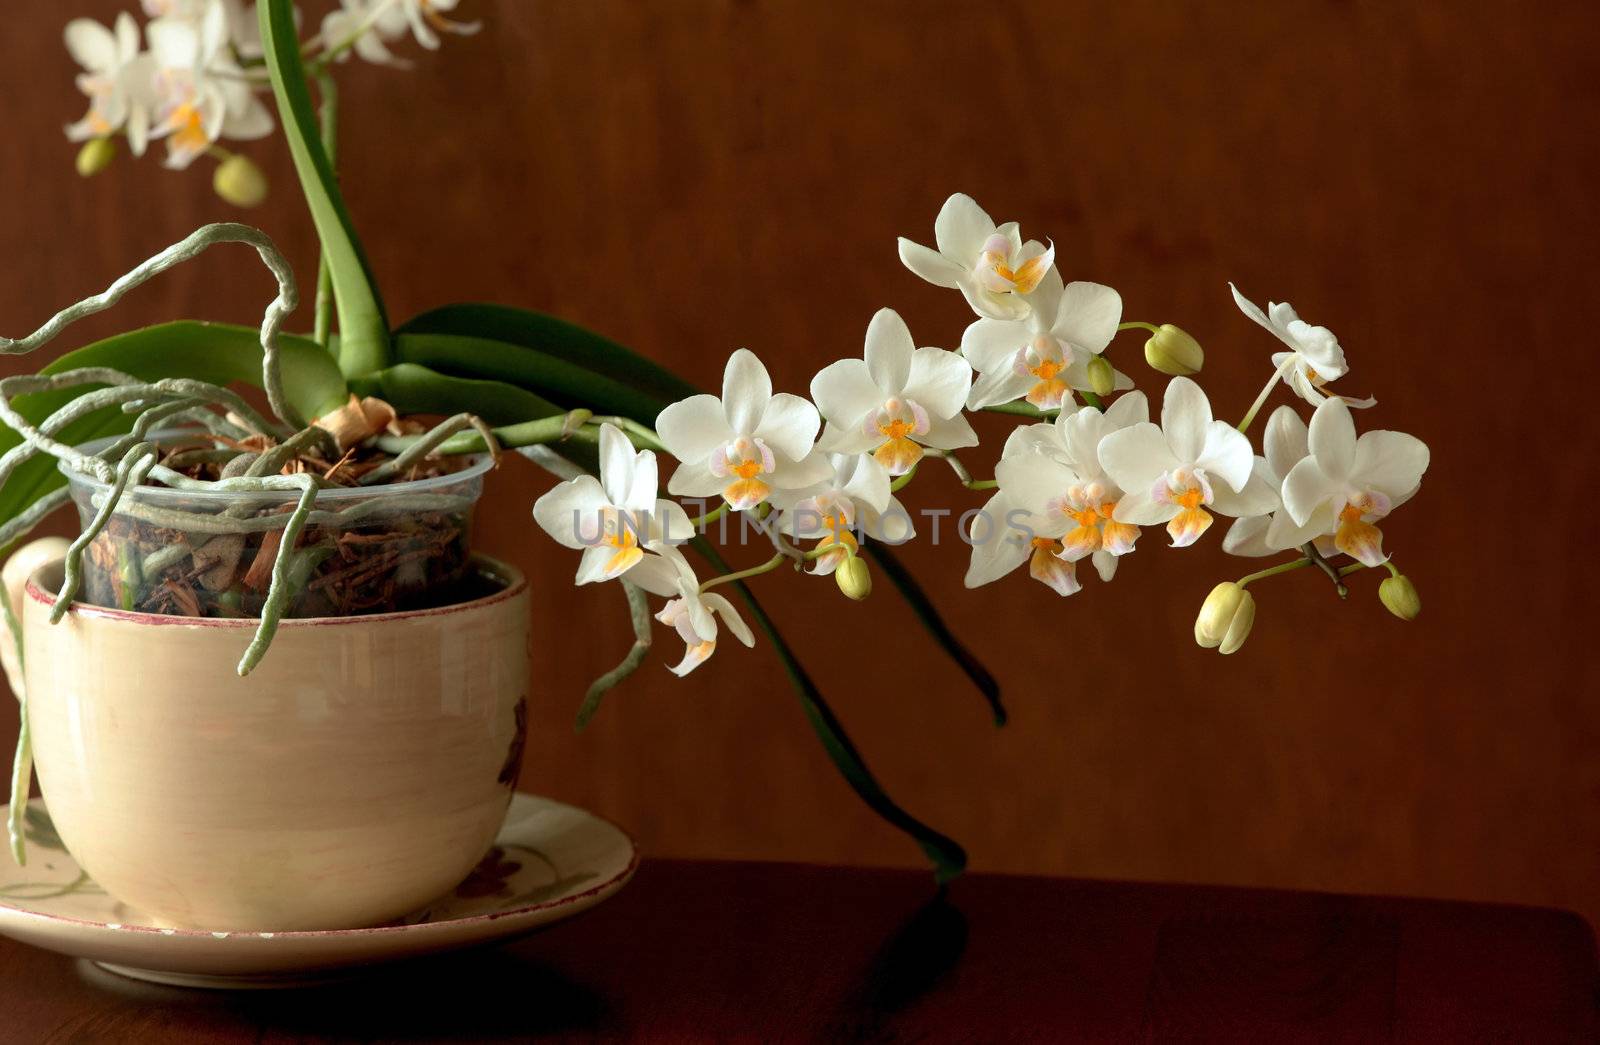 Mini orchids in a cup.